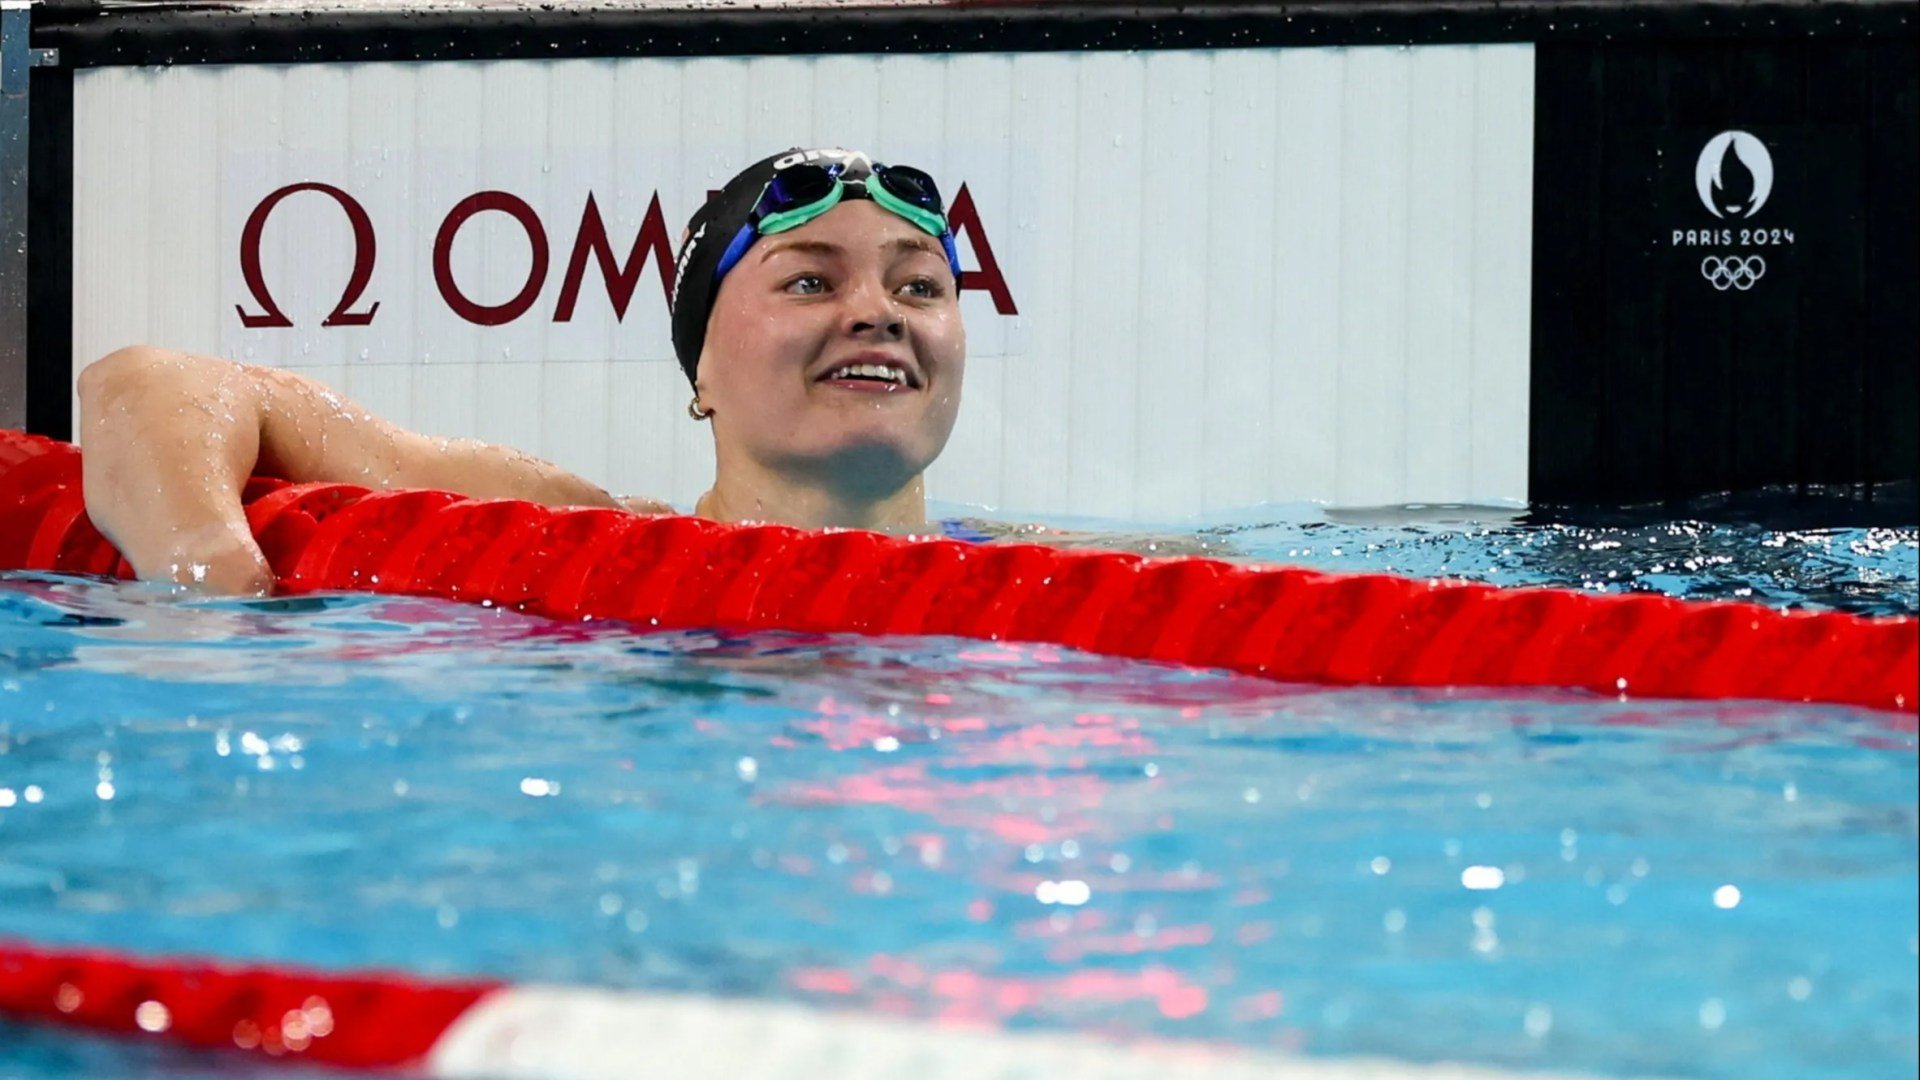 Ireland swimming star Mona McSharry believes her best is yet to come in 100m breaststroke semi-final